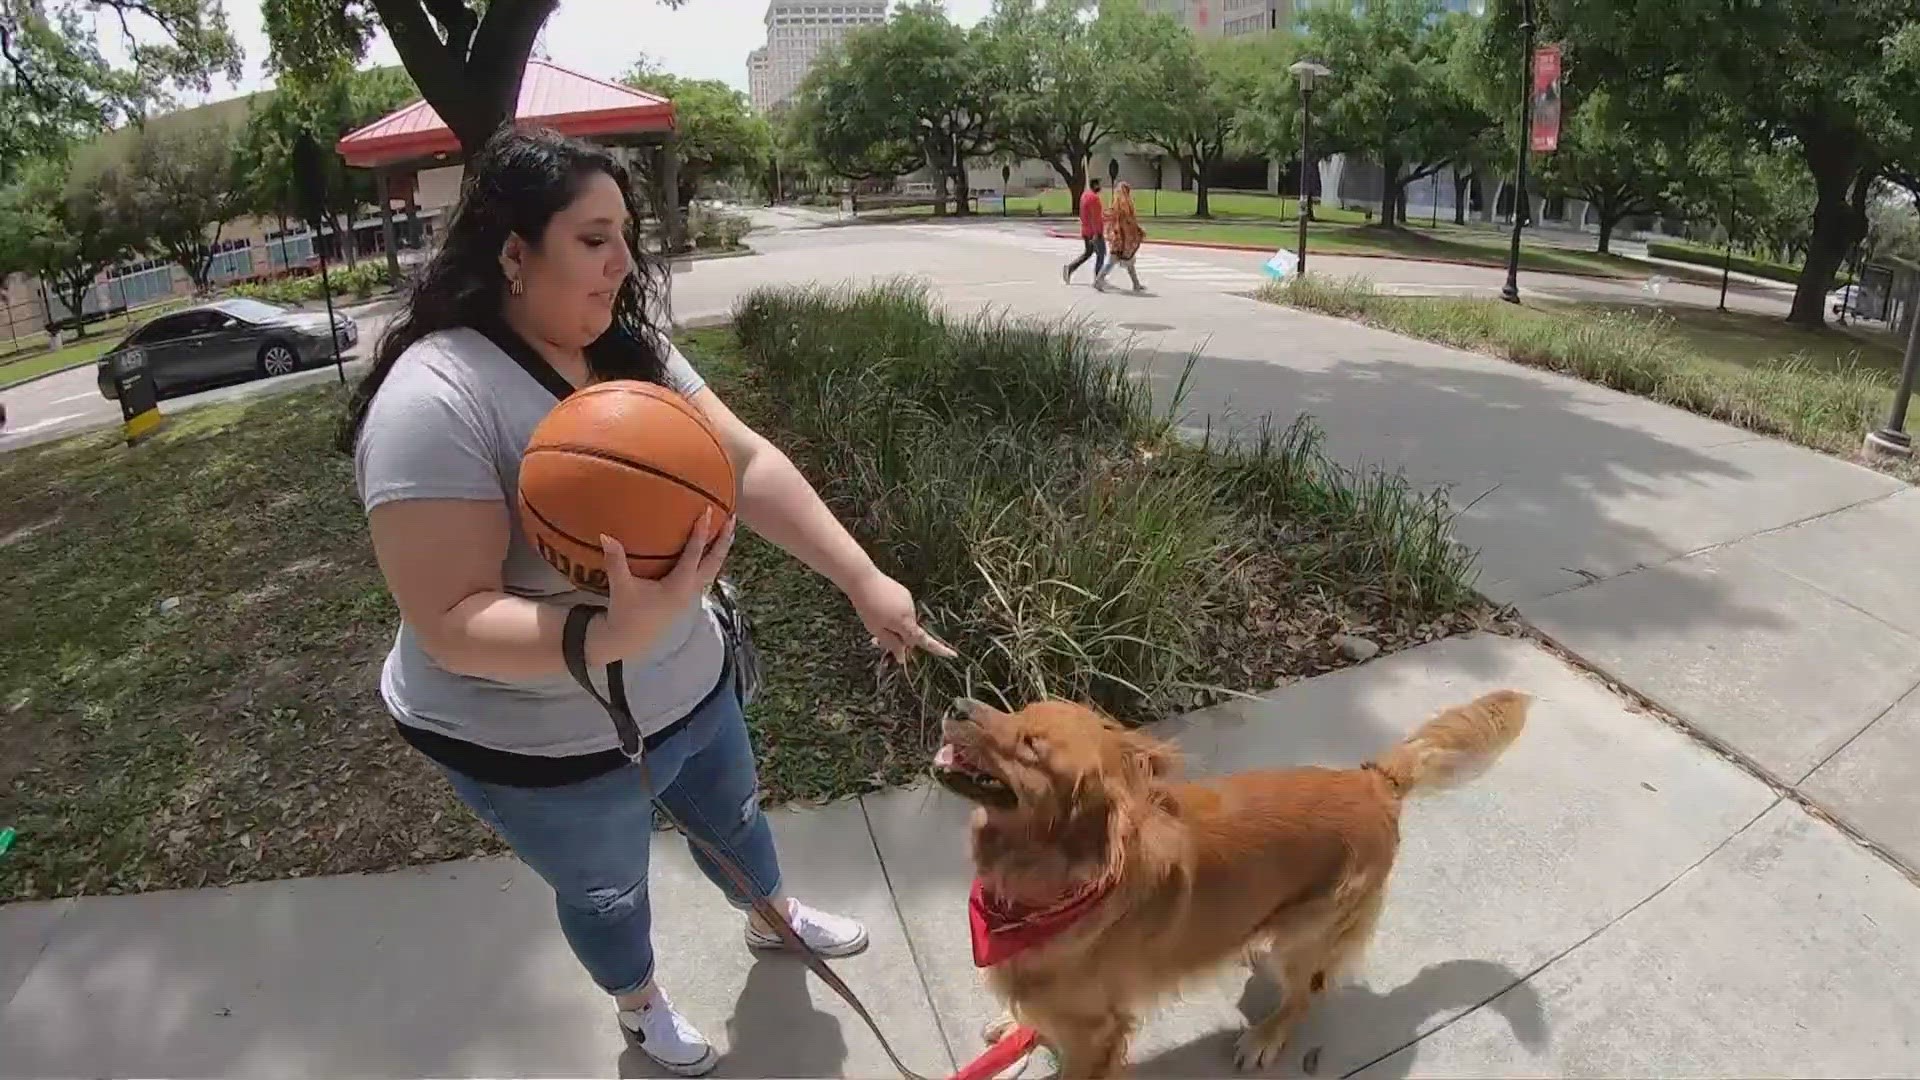 The golden retriever is the unofficial mascot of the UH Hispanic Alumni Network. His POV reels during basketball season are very popular.